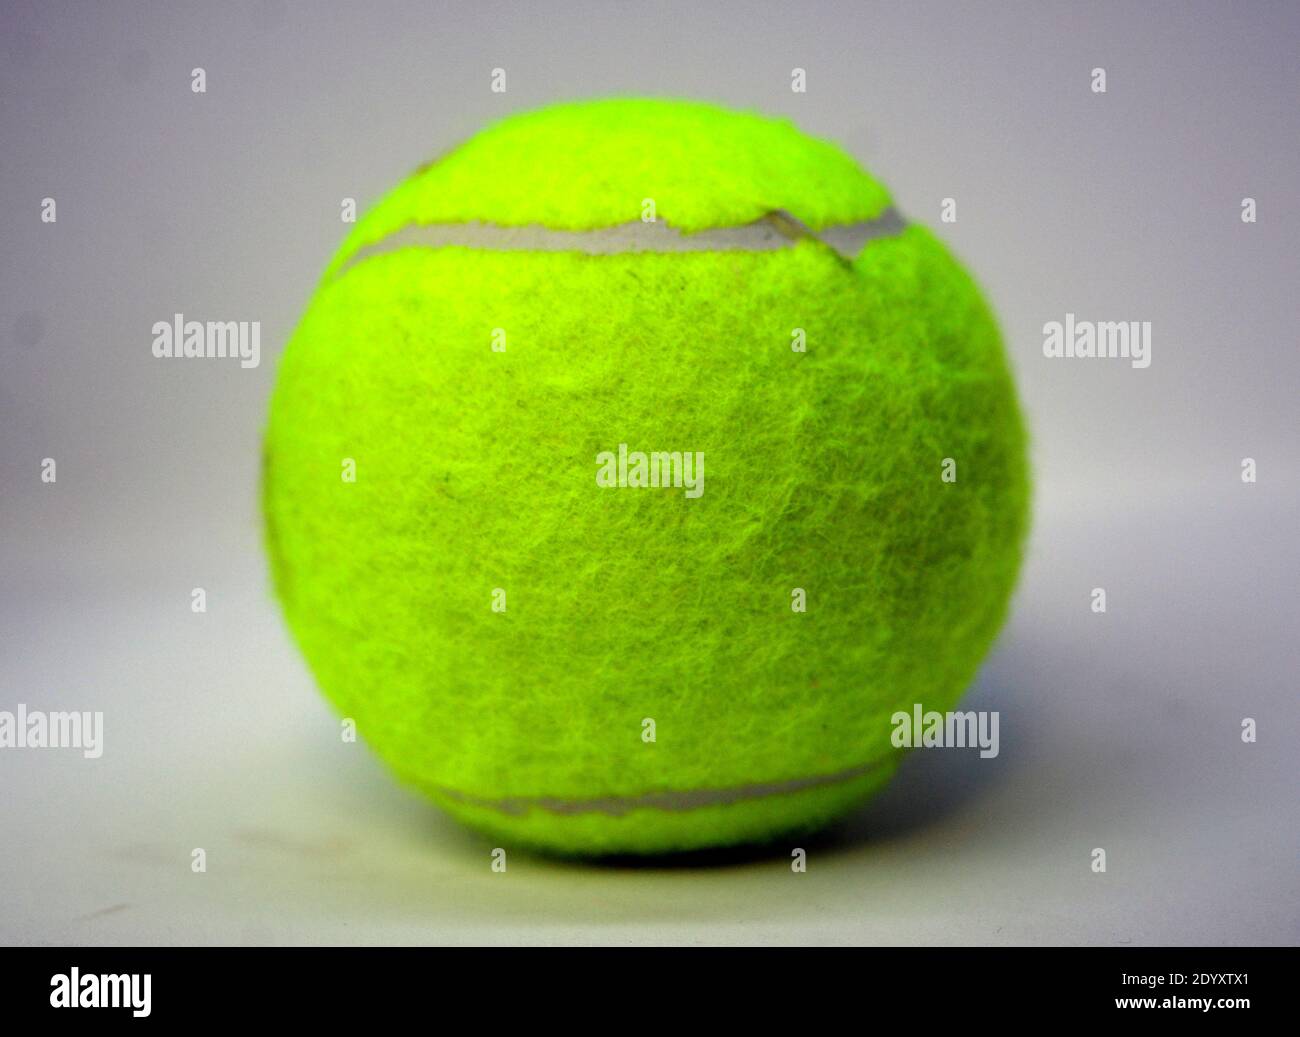 Tennis Ball With White Background Stock Photo